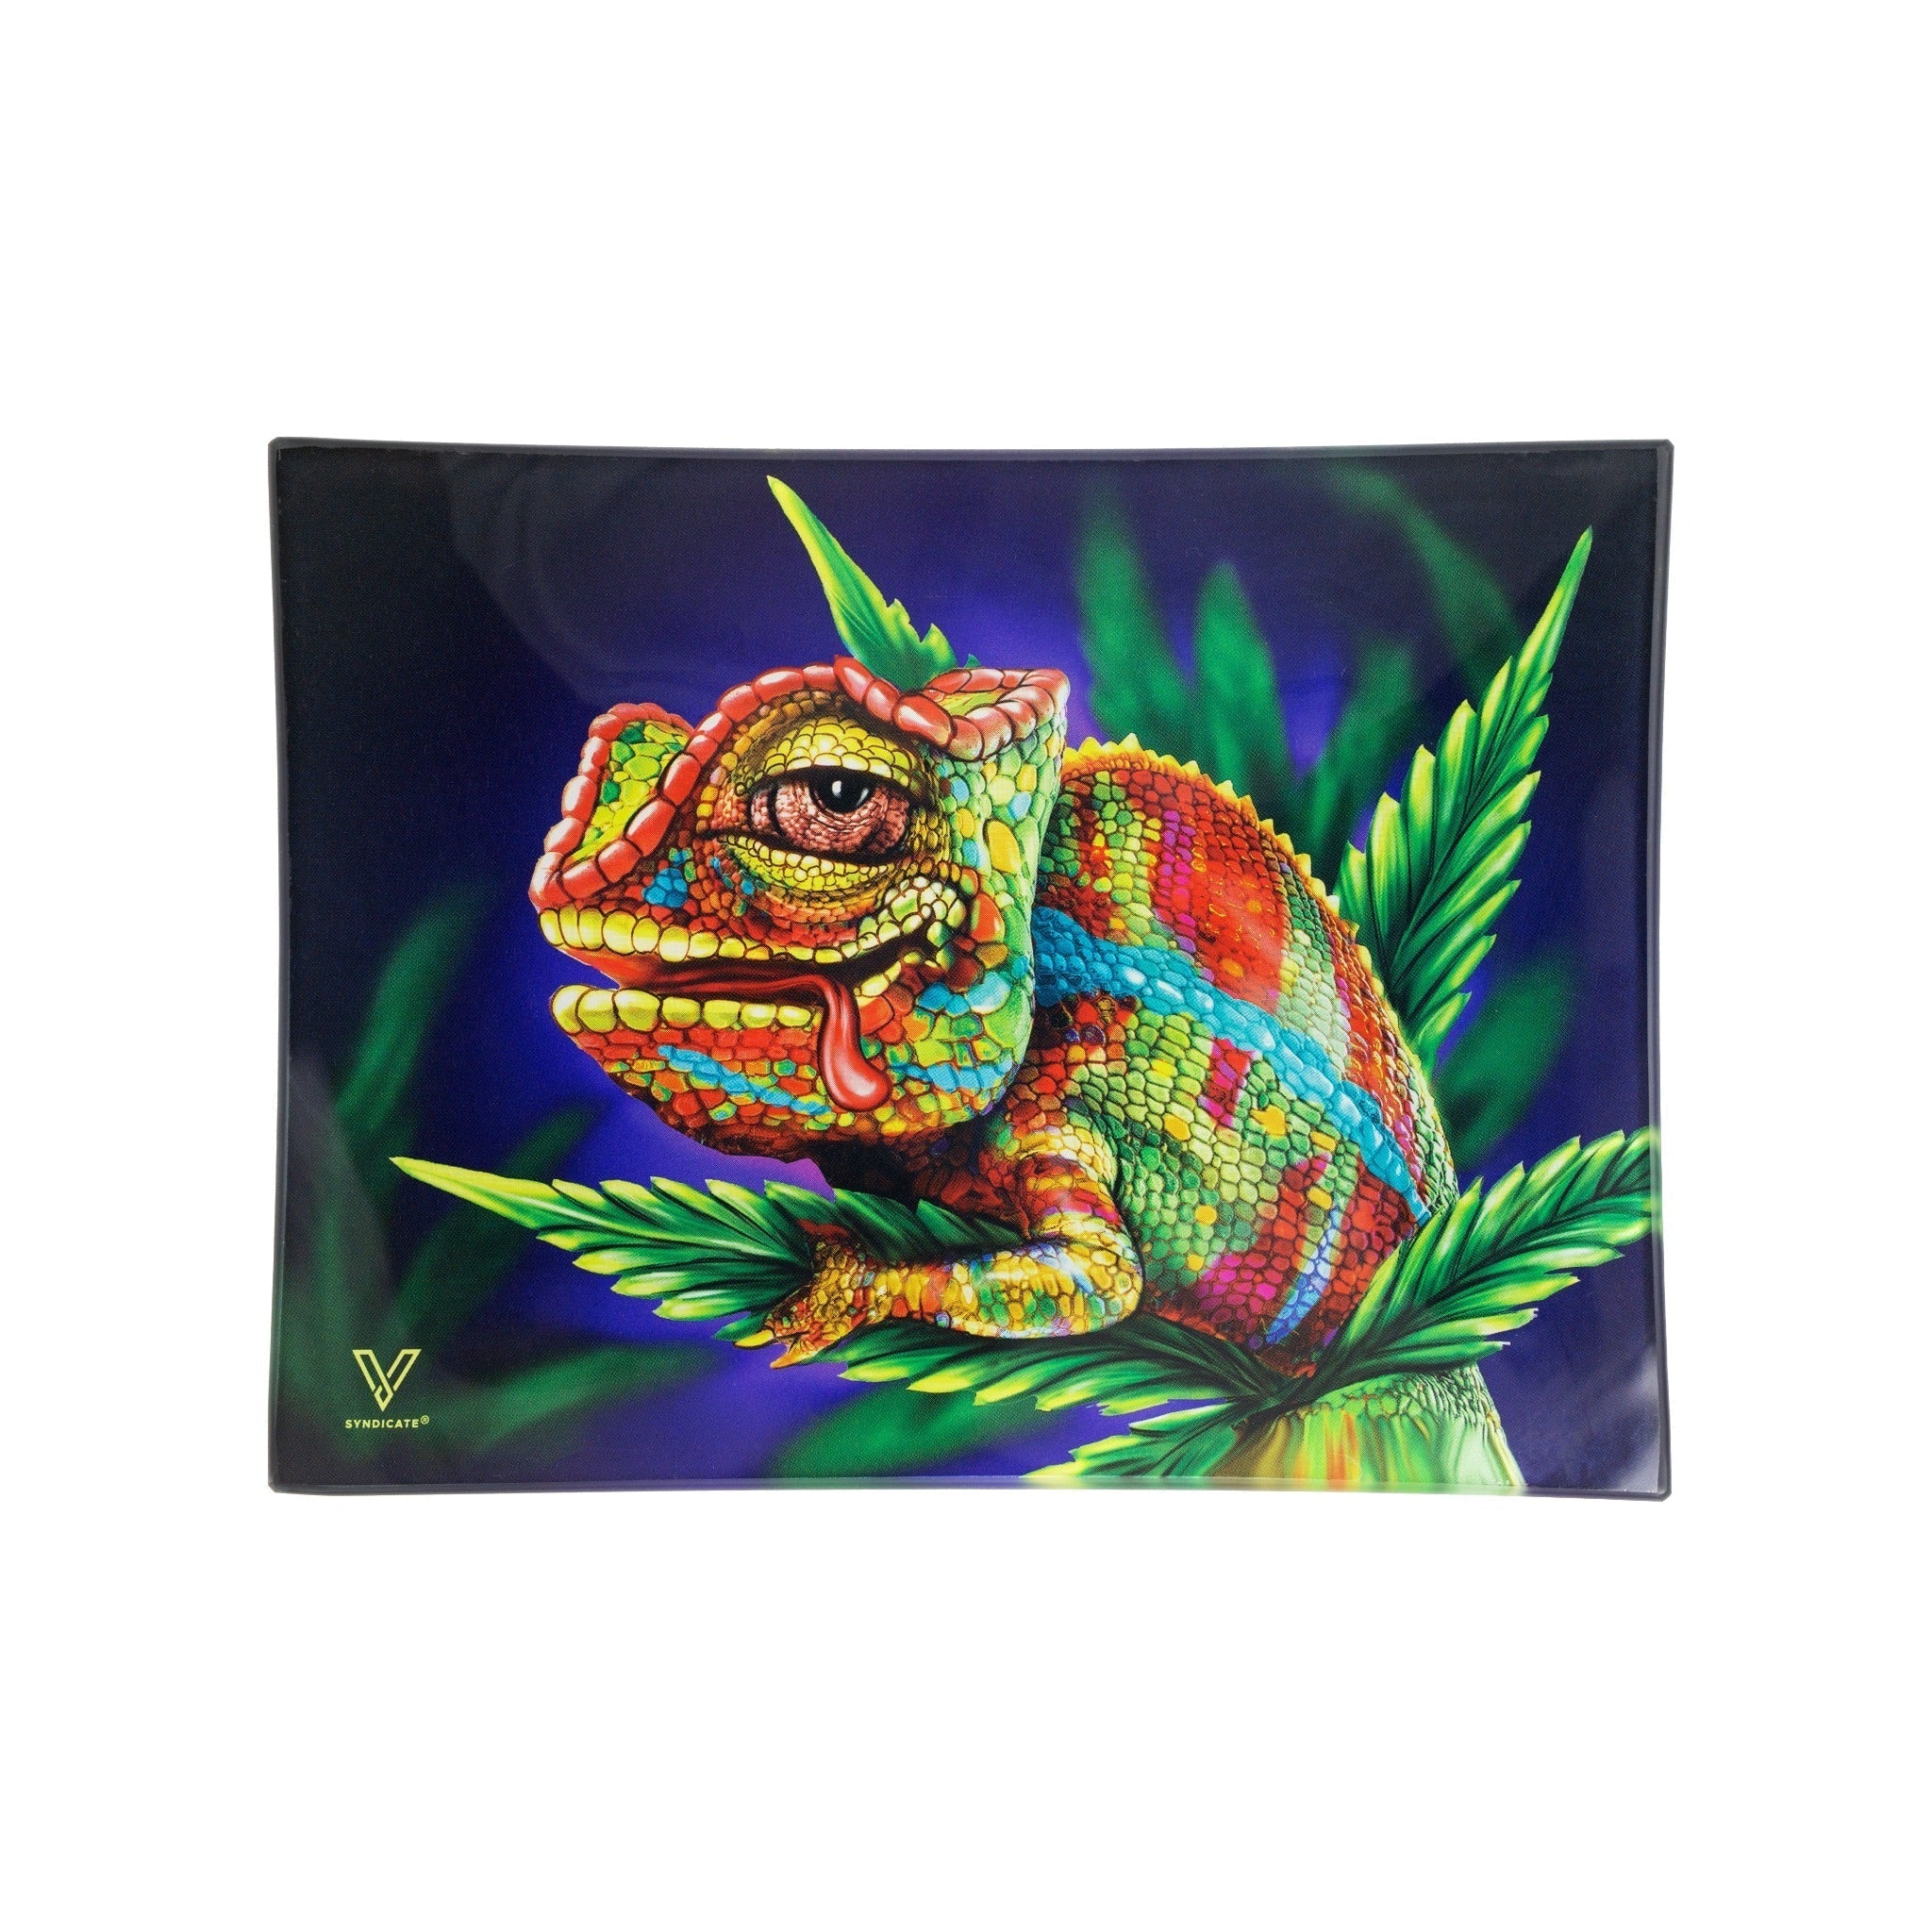 V Syndicate Cloud 9 Chameleon Glass Rolling Tray Rolling Tray VS Small 